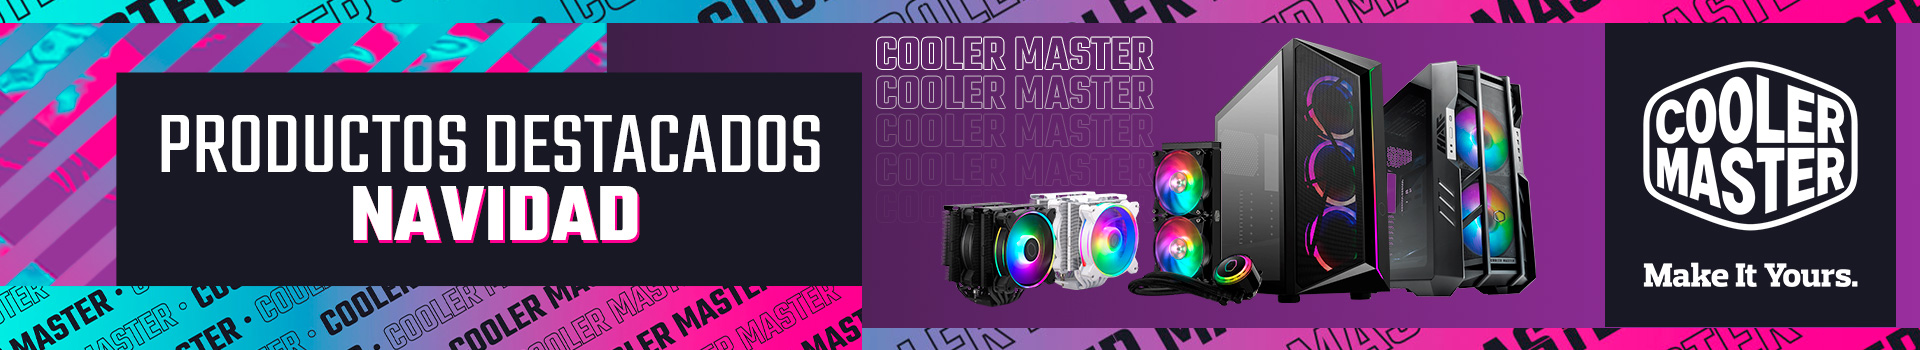 Productos Cooler Master